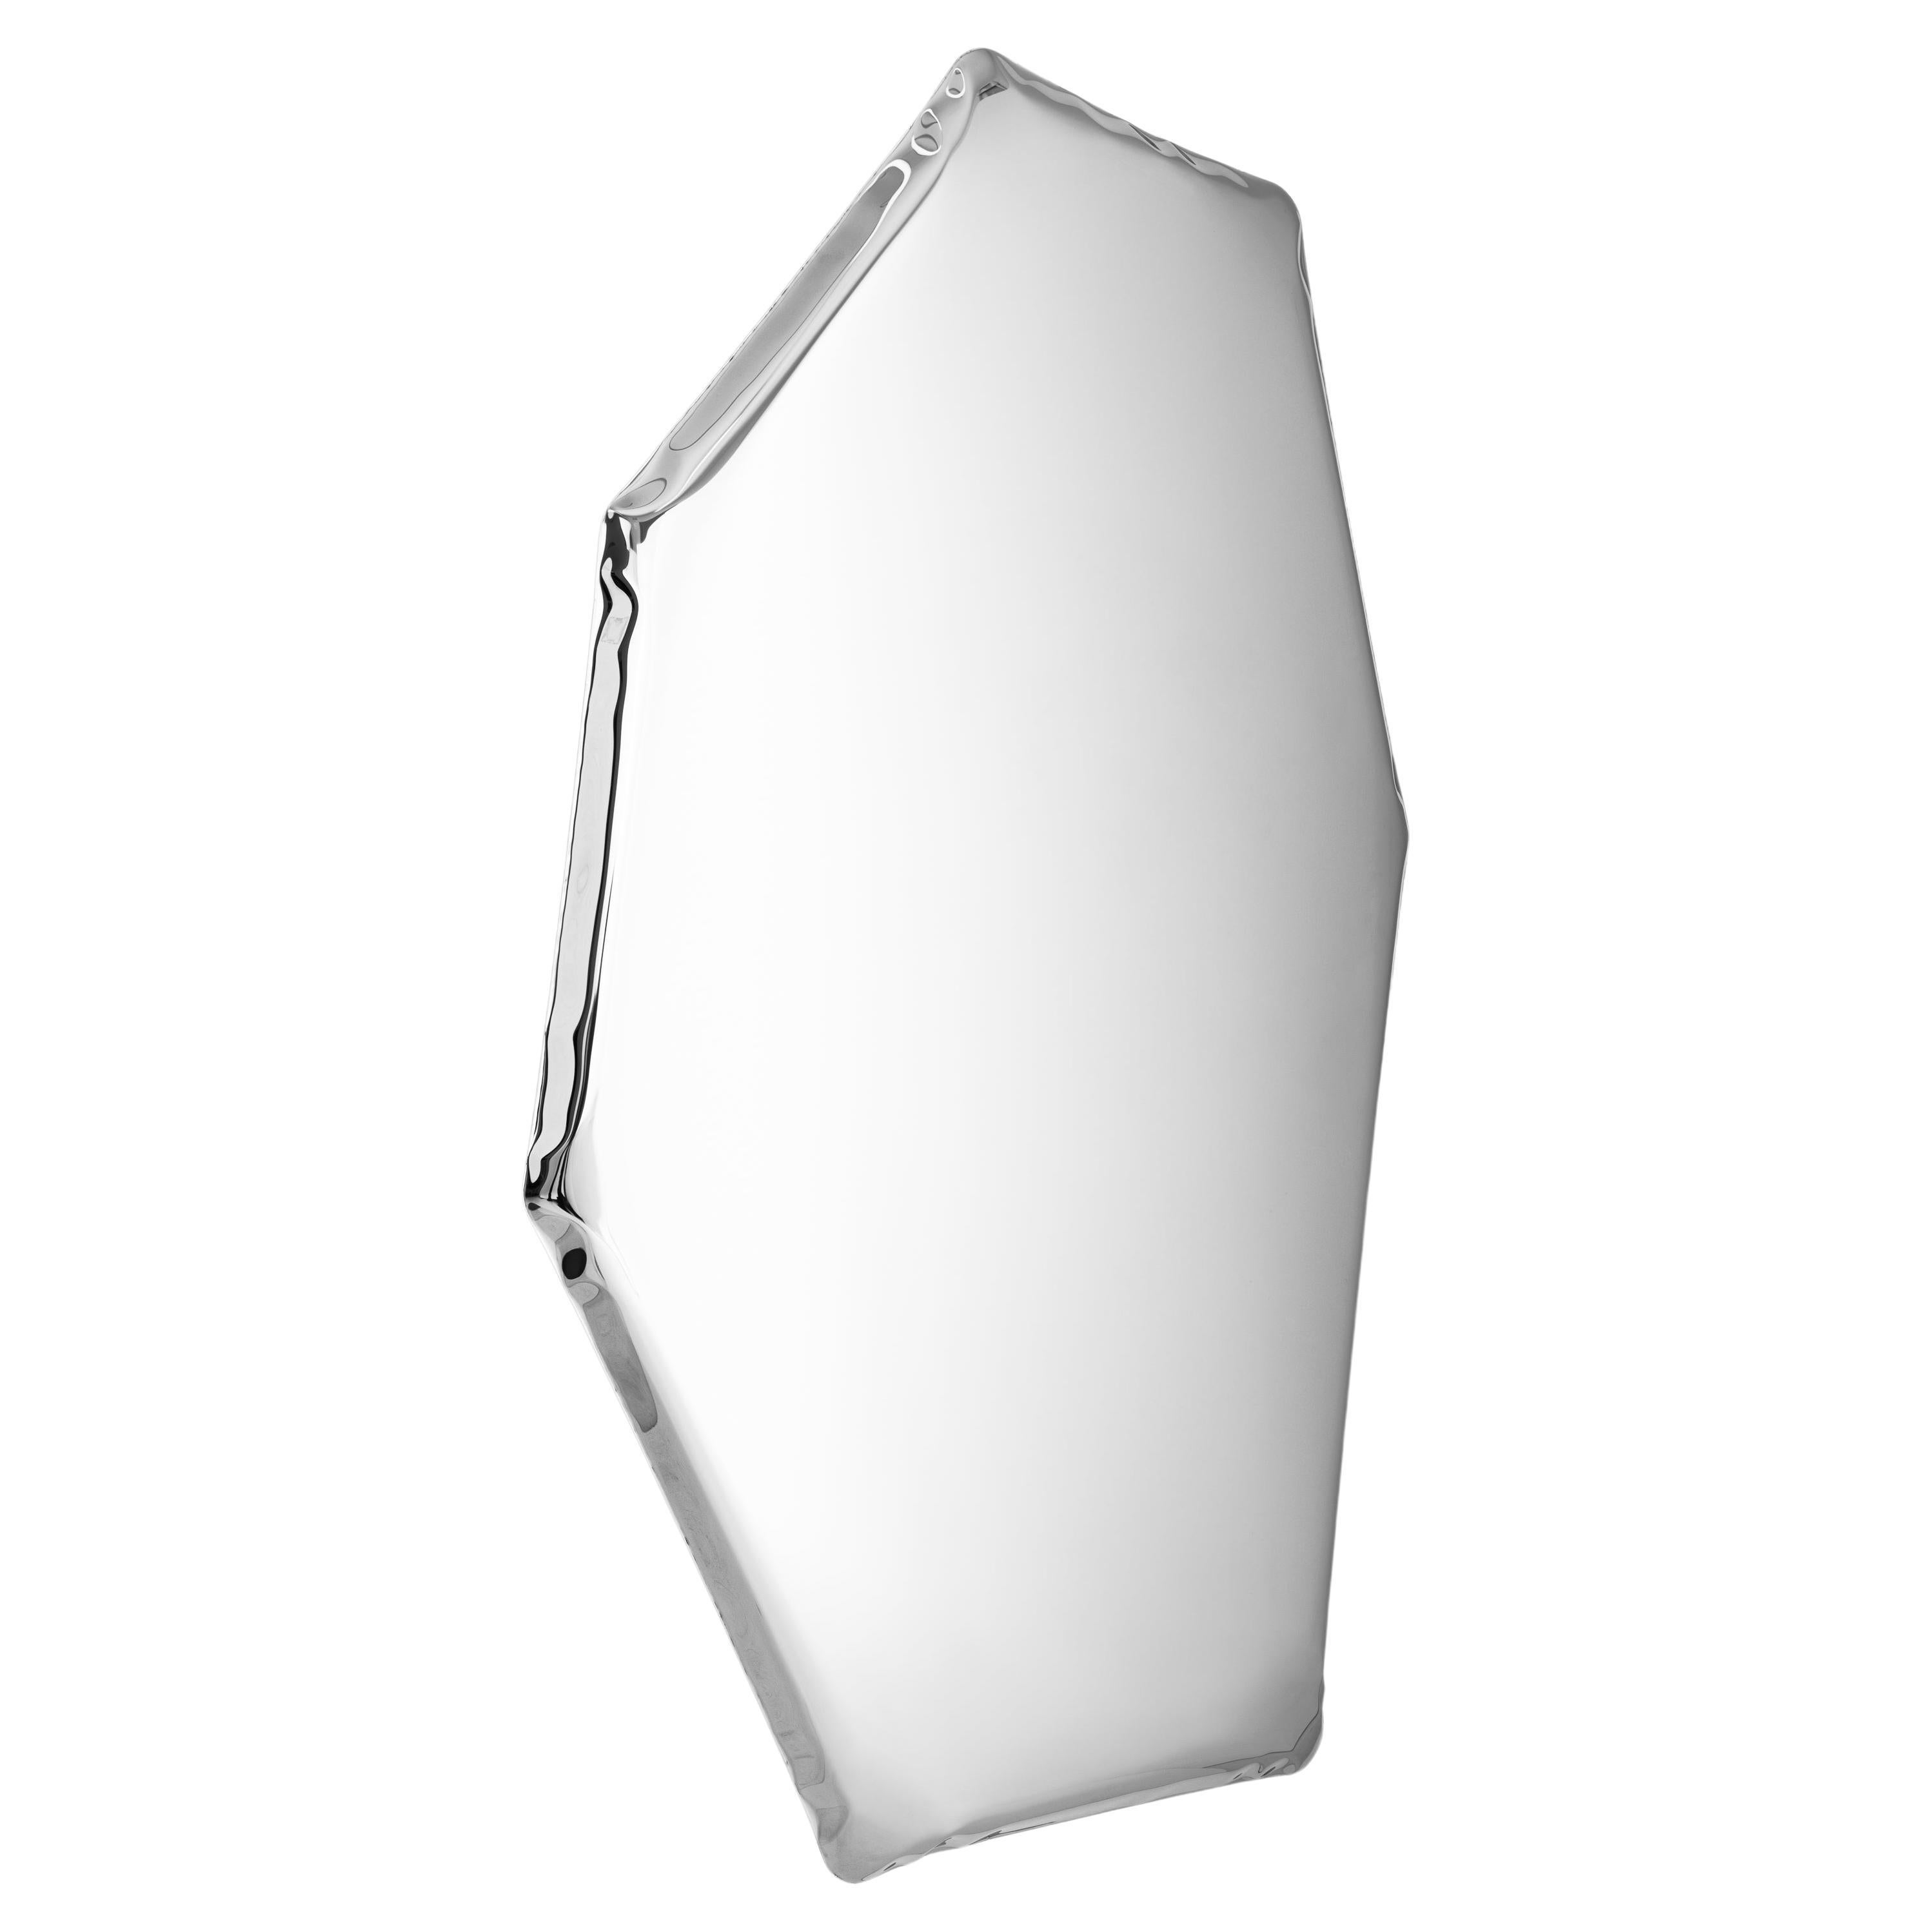 Tafla Mirror C2 in Polished Stainless Steel by Zieta For Sale